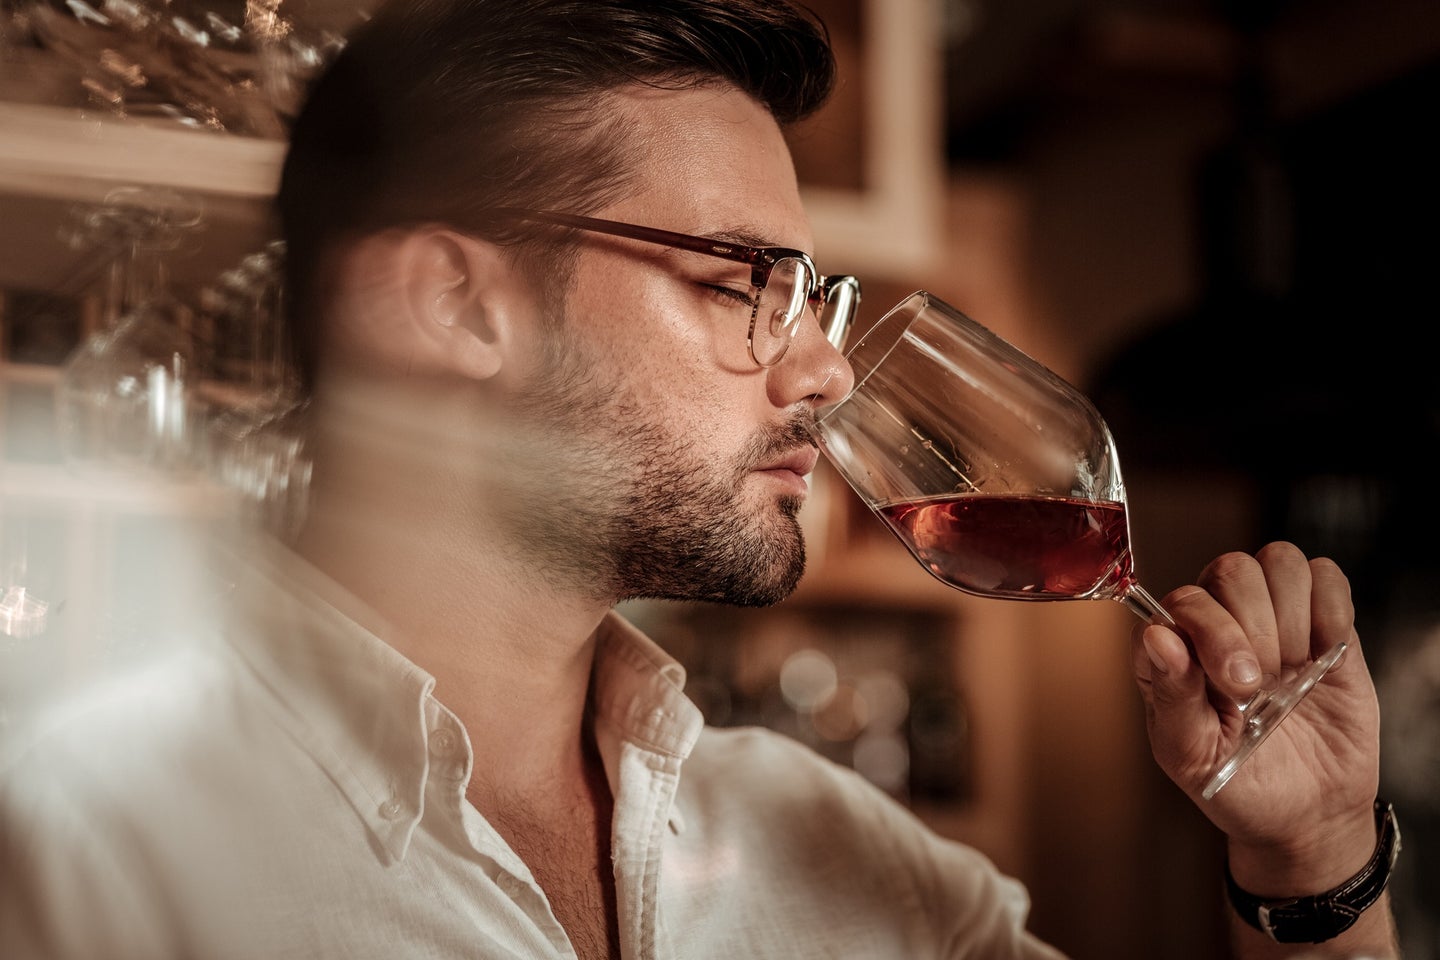 Person with short brown hair and glasses inhaling from a glass of red wine to describe the smell